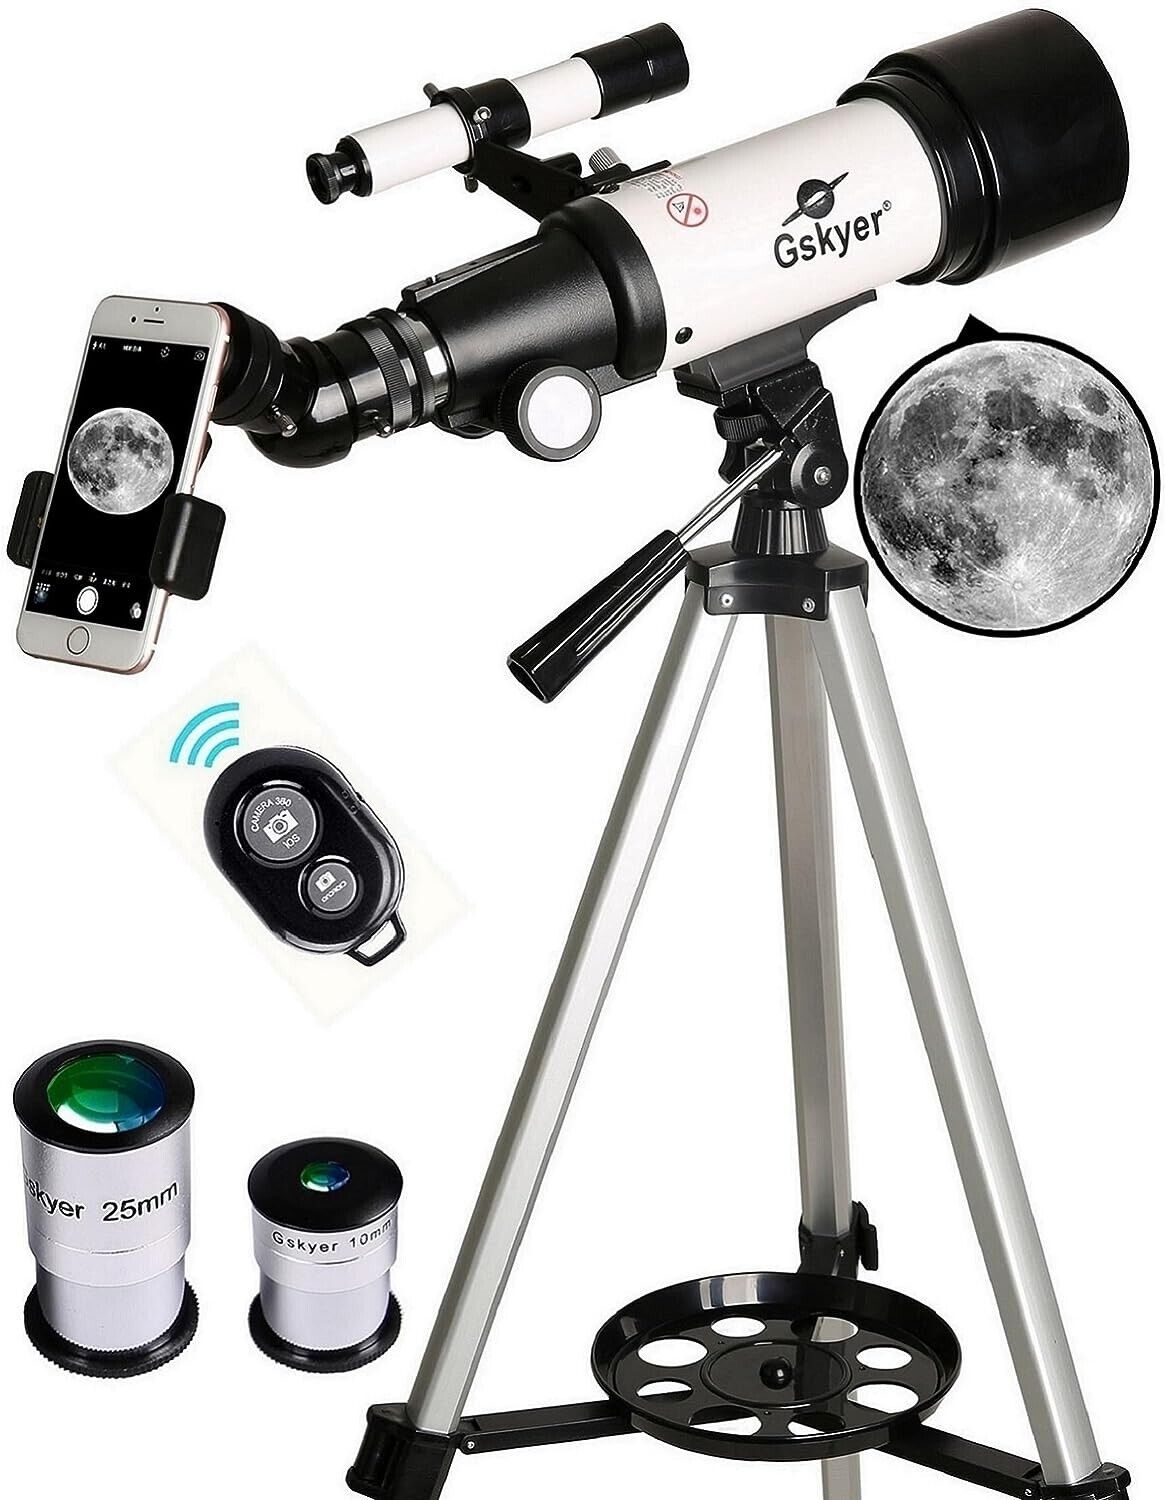 Gskyer Easy Use Telescope Perfect For Solar Eclipse Pictures With Phone Adapter